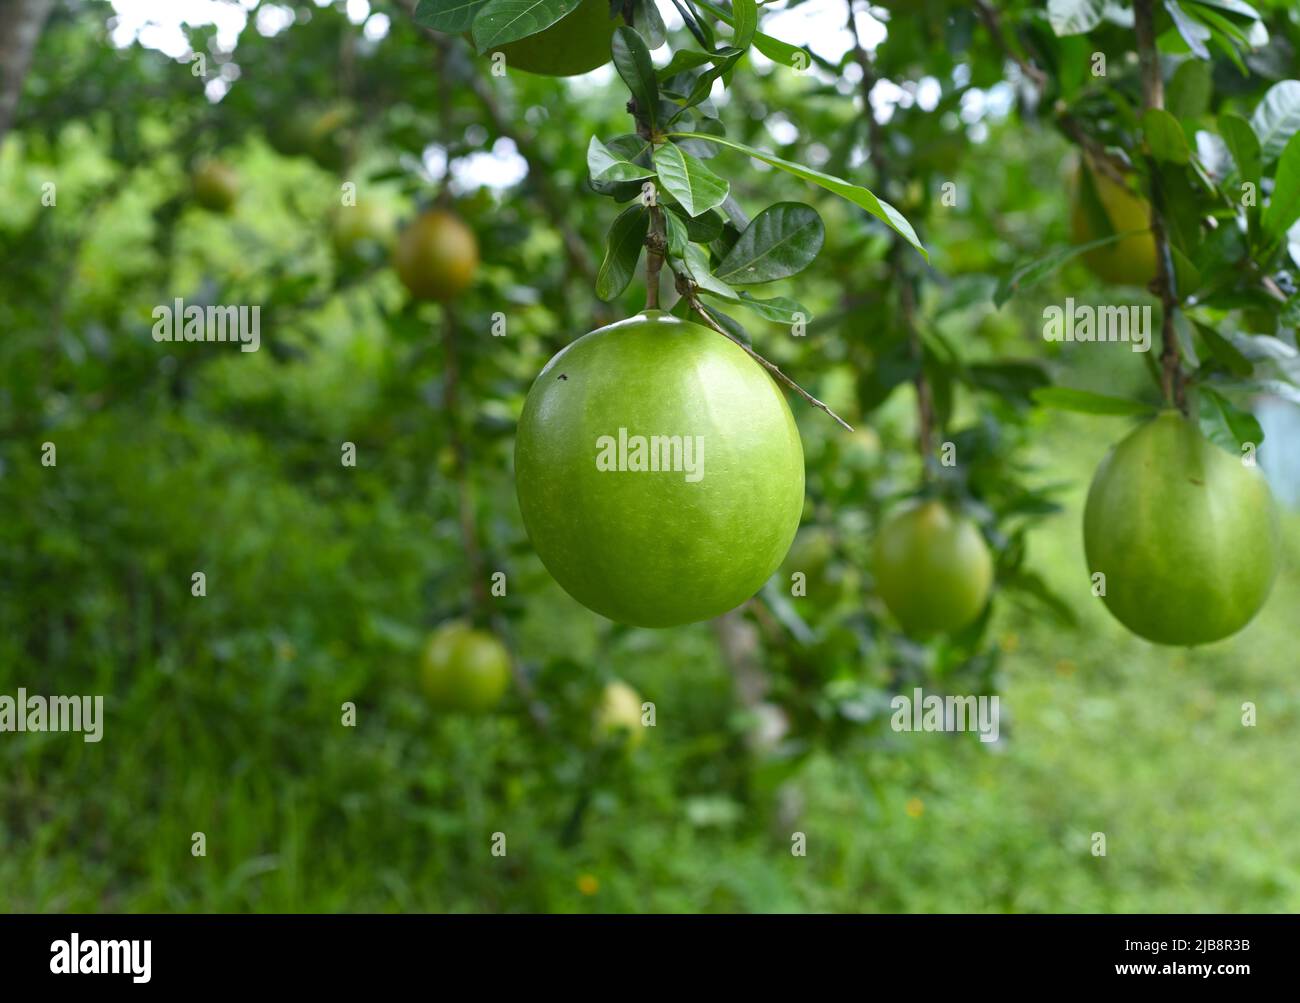 Crescentia cujete, commonly known as the calabash tree growing in Vietnam Stock Photo